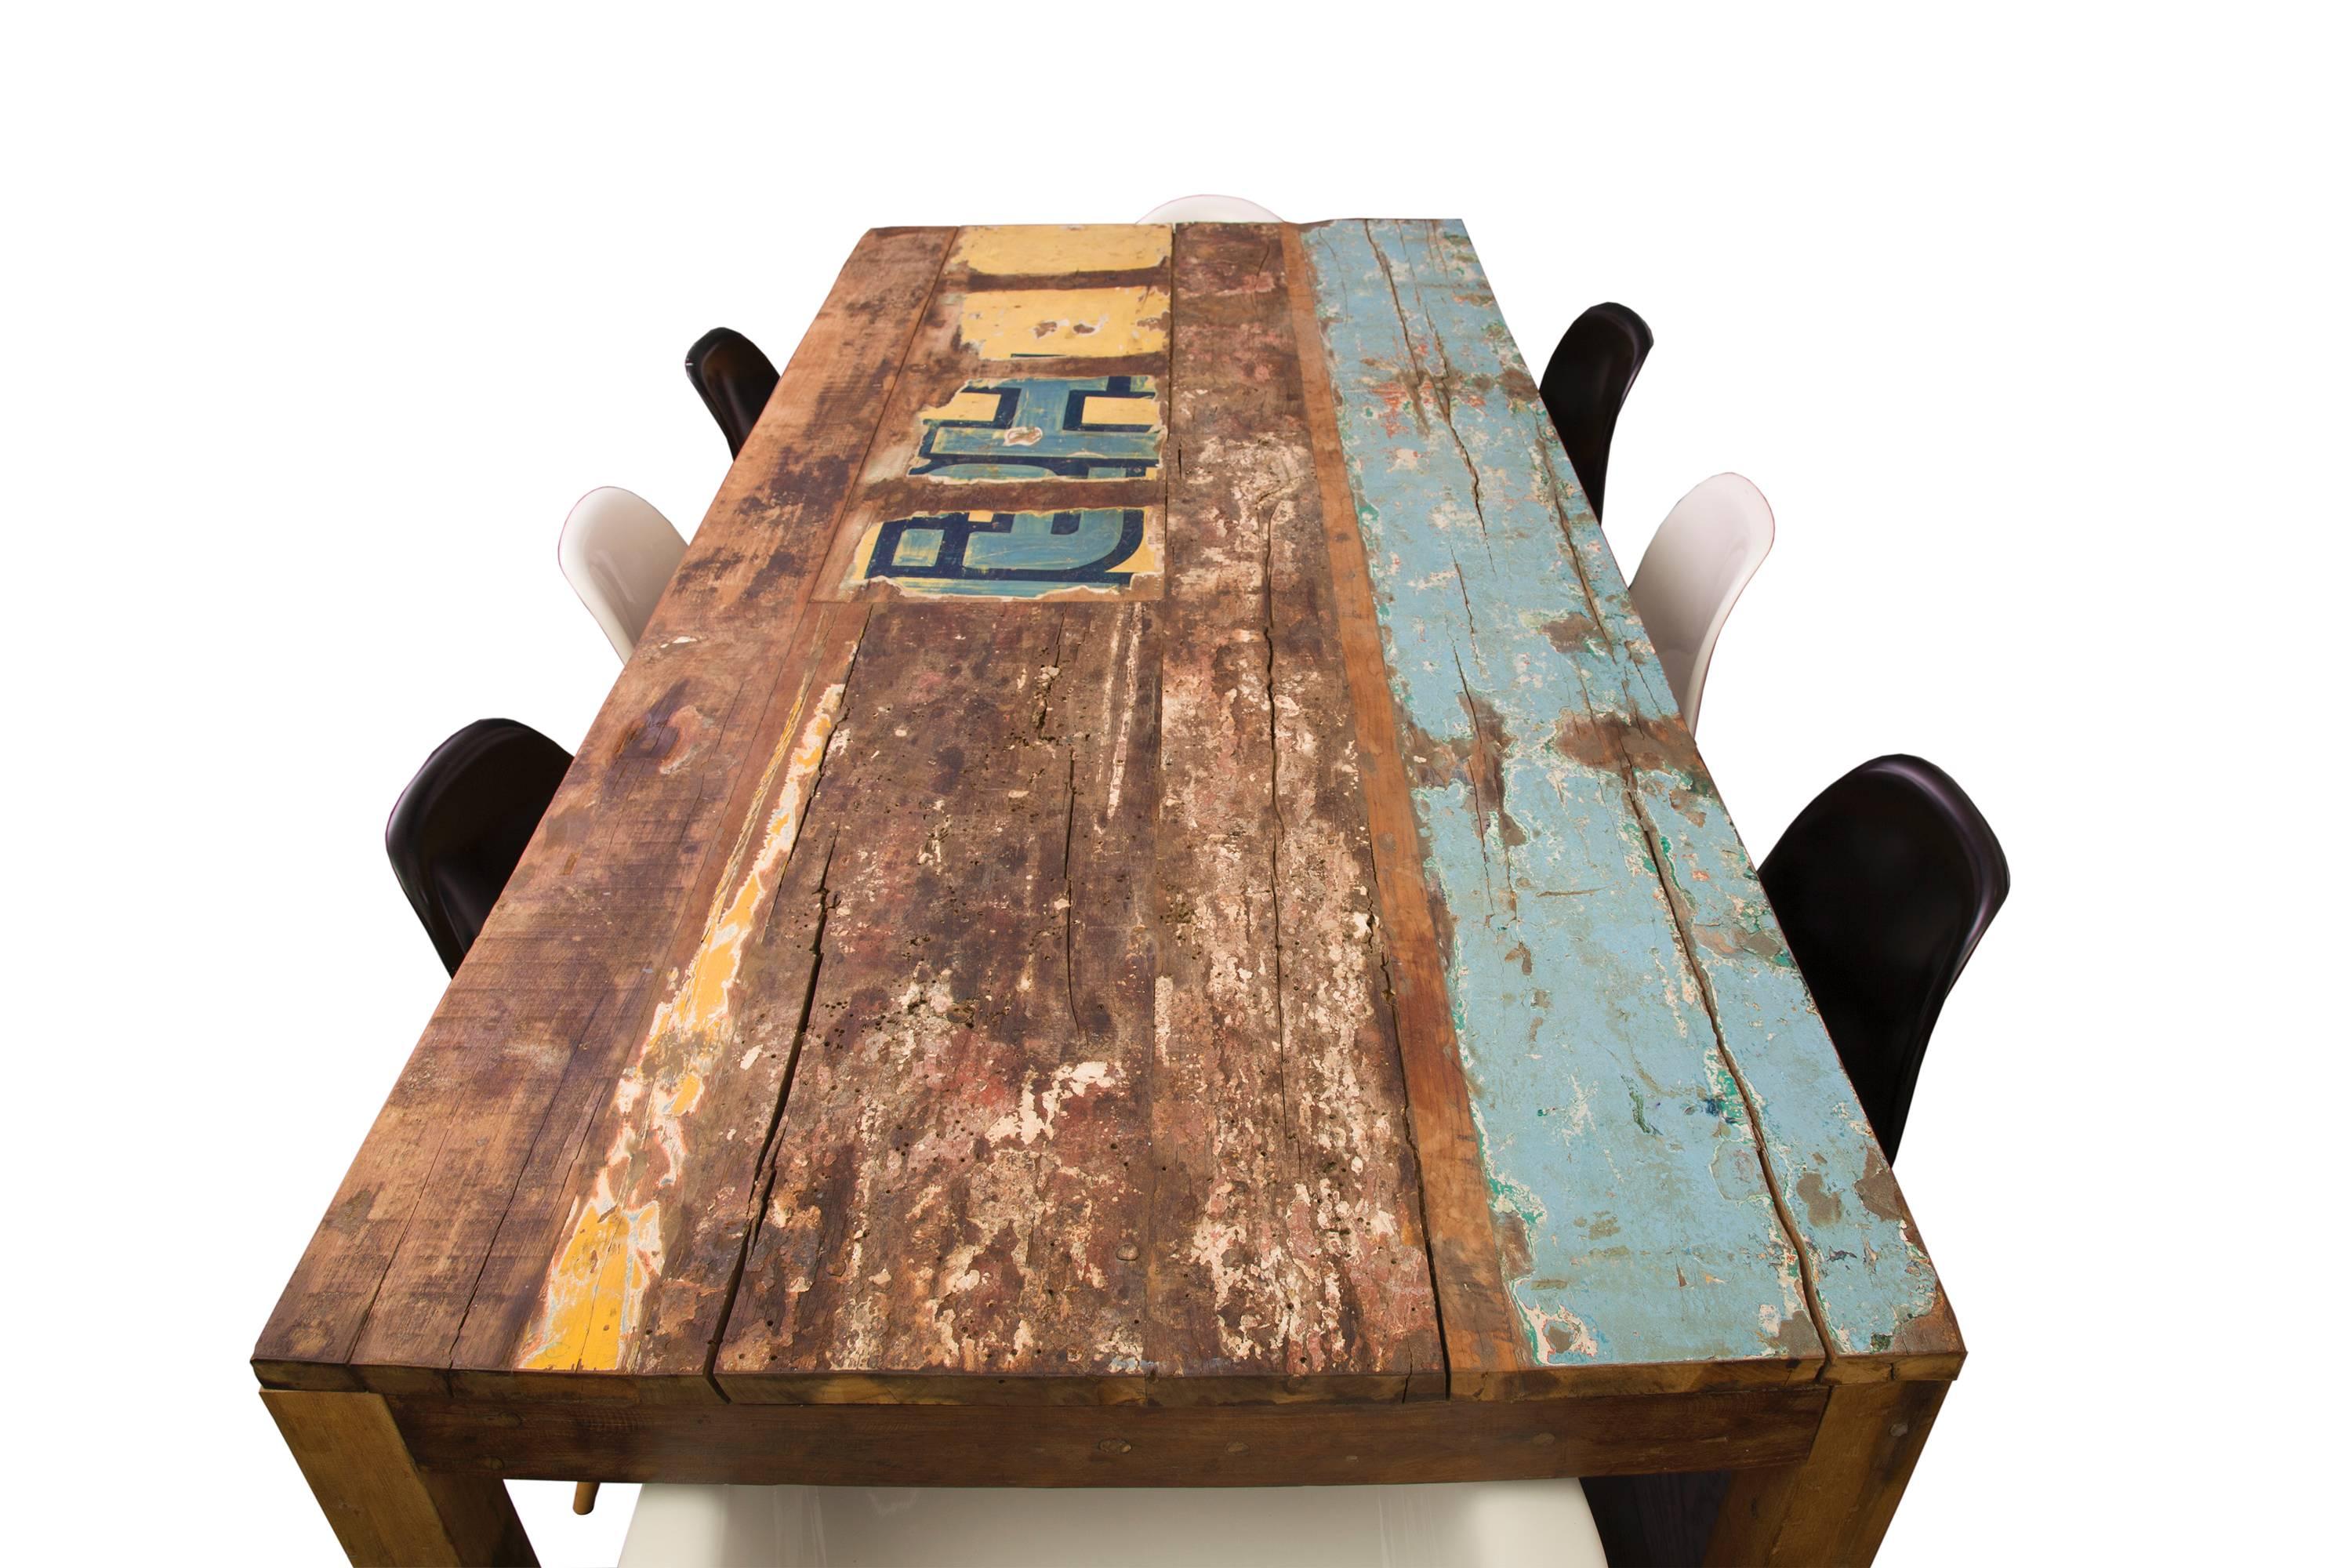 Reclaimed Indonesian fishing boat dining table.

Dining chairs for photo/display purposes only.